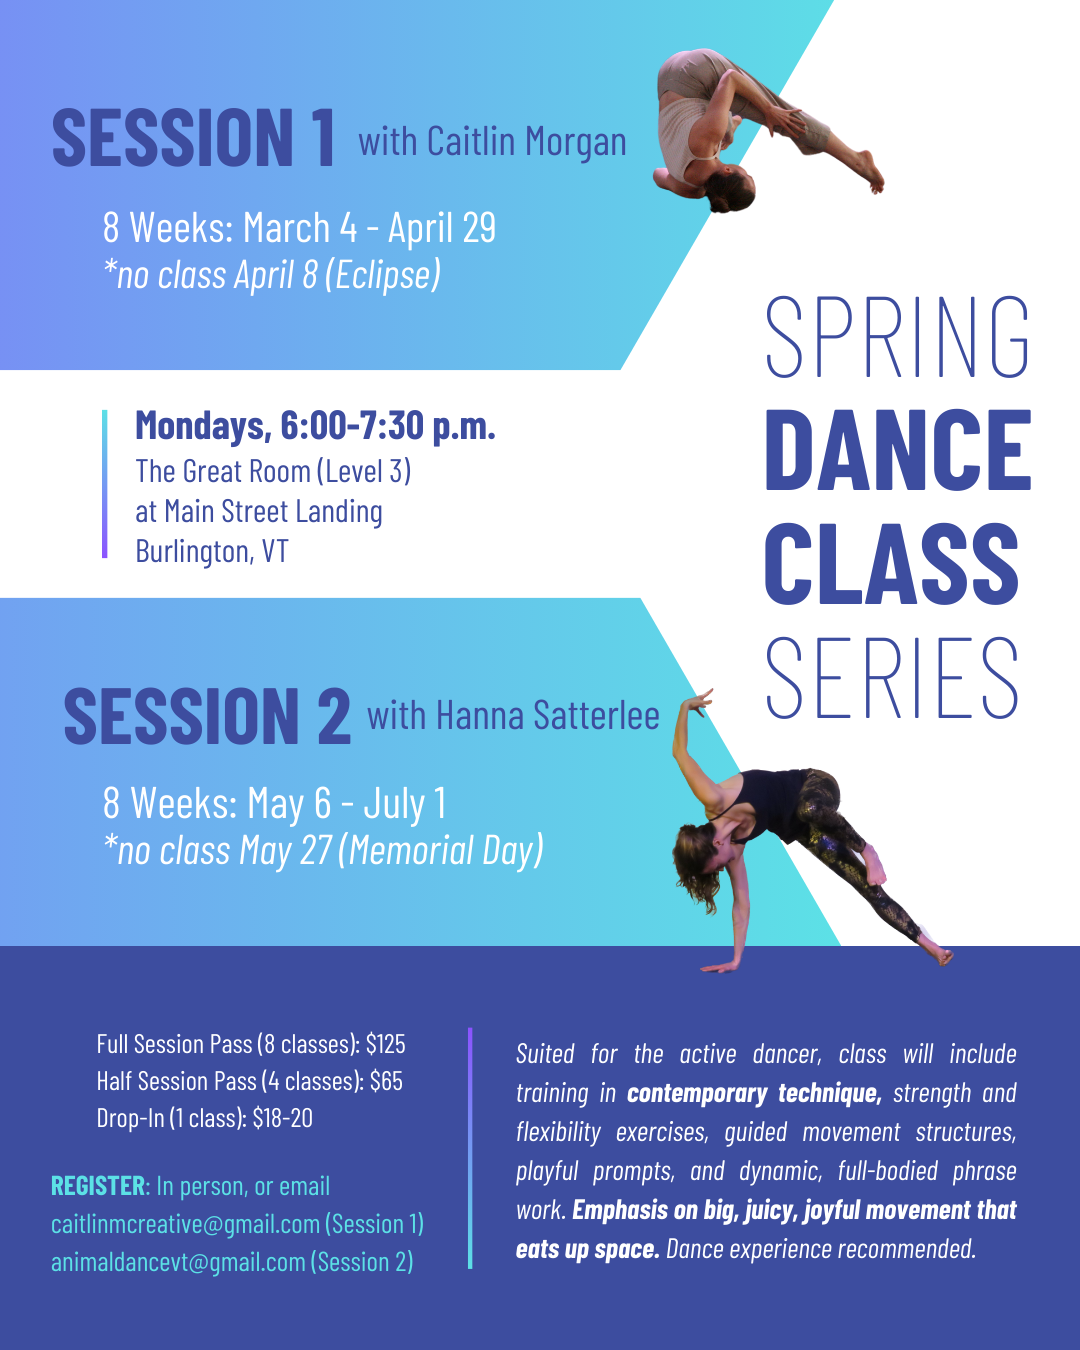 A blue and purple poster with two white women dancing. Text reads "Spring Dance Class Series" in bold.